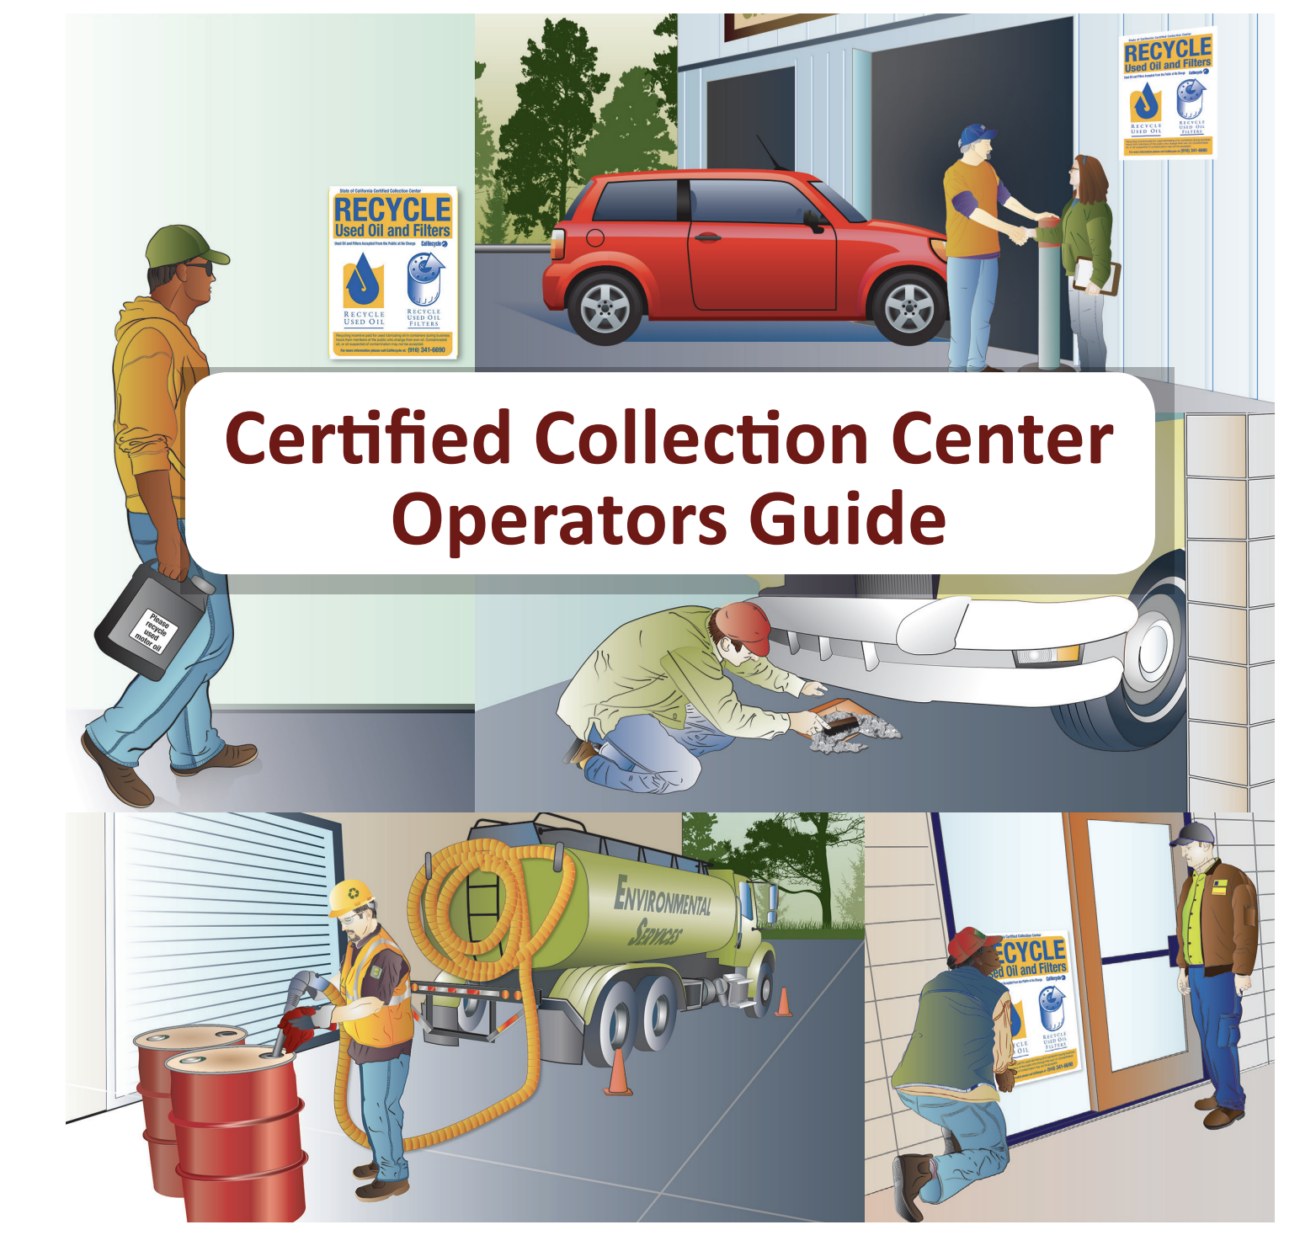 The image is a guide illustration showing people recycling automotive fluids and parts at a certified collection center.